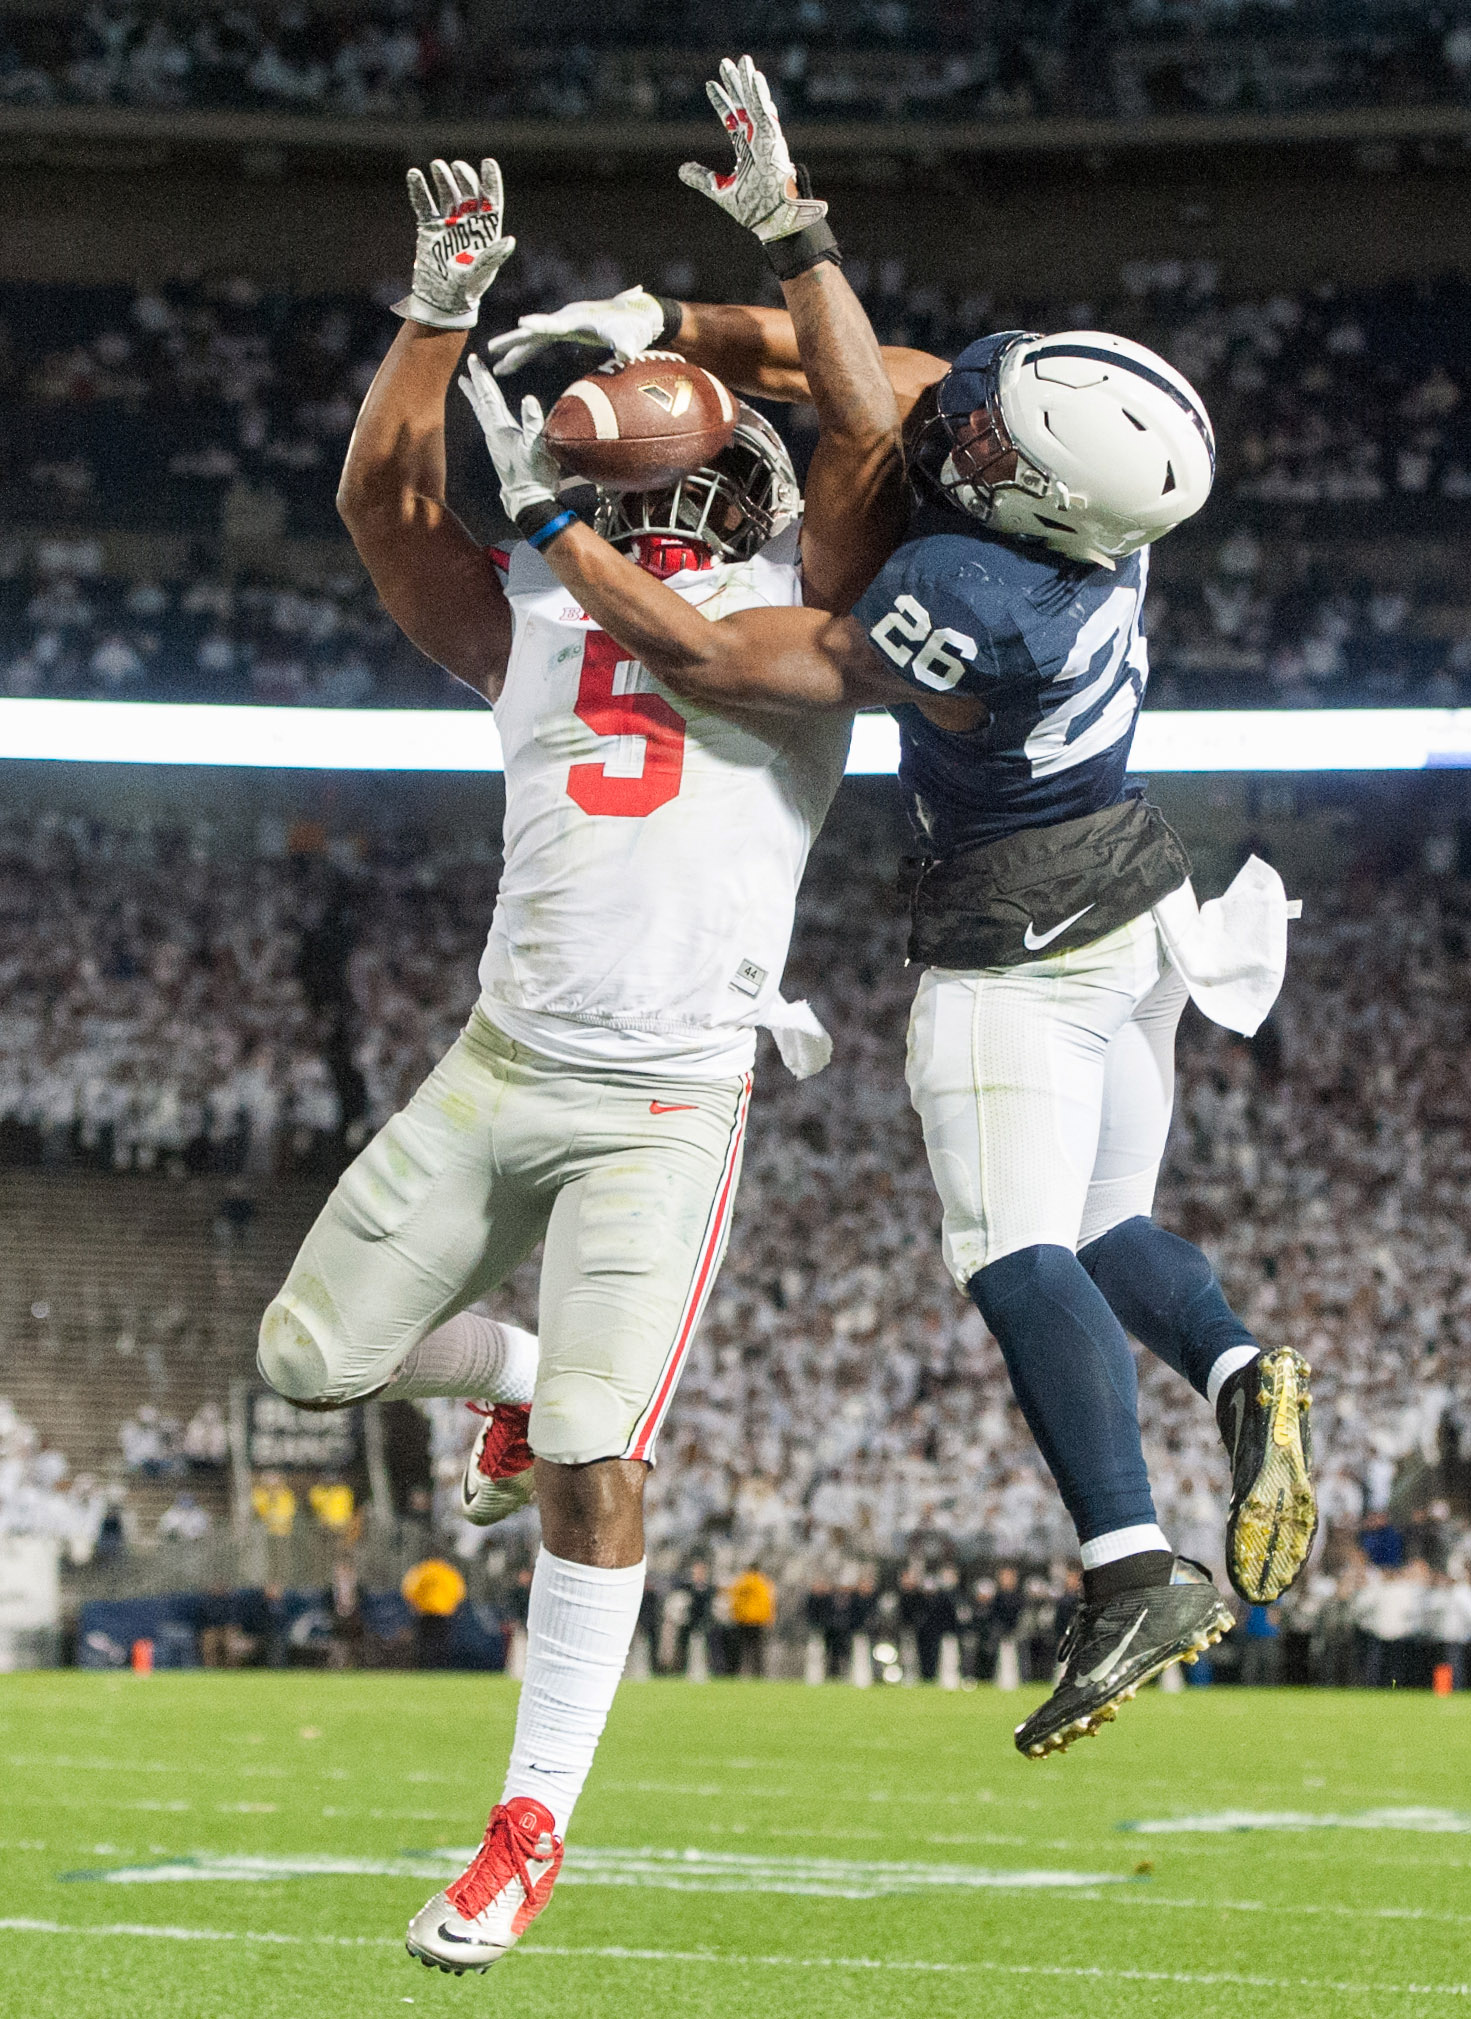  Penn State running back Saquon Barkley can't pull in a touchdown pass while pressured by Ohio State linebacker Raekwon McMillan during a college football game Saturday, Oct. 22, 2016, at Beaver Stadium in University Park. &nbsp;Penn State beat Ohio 